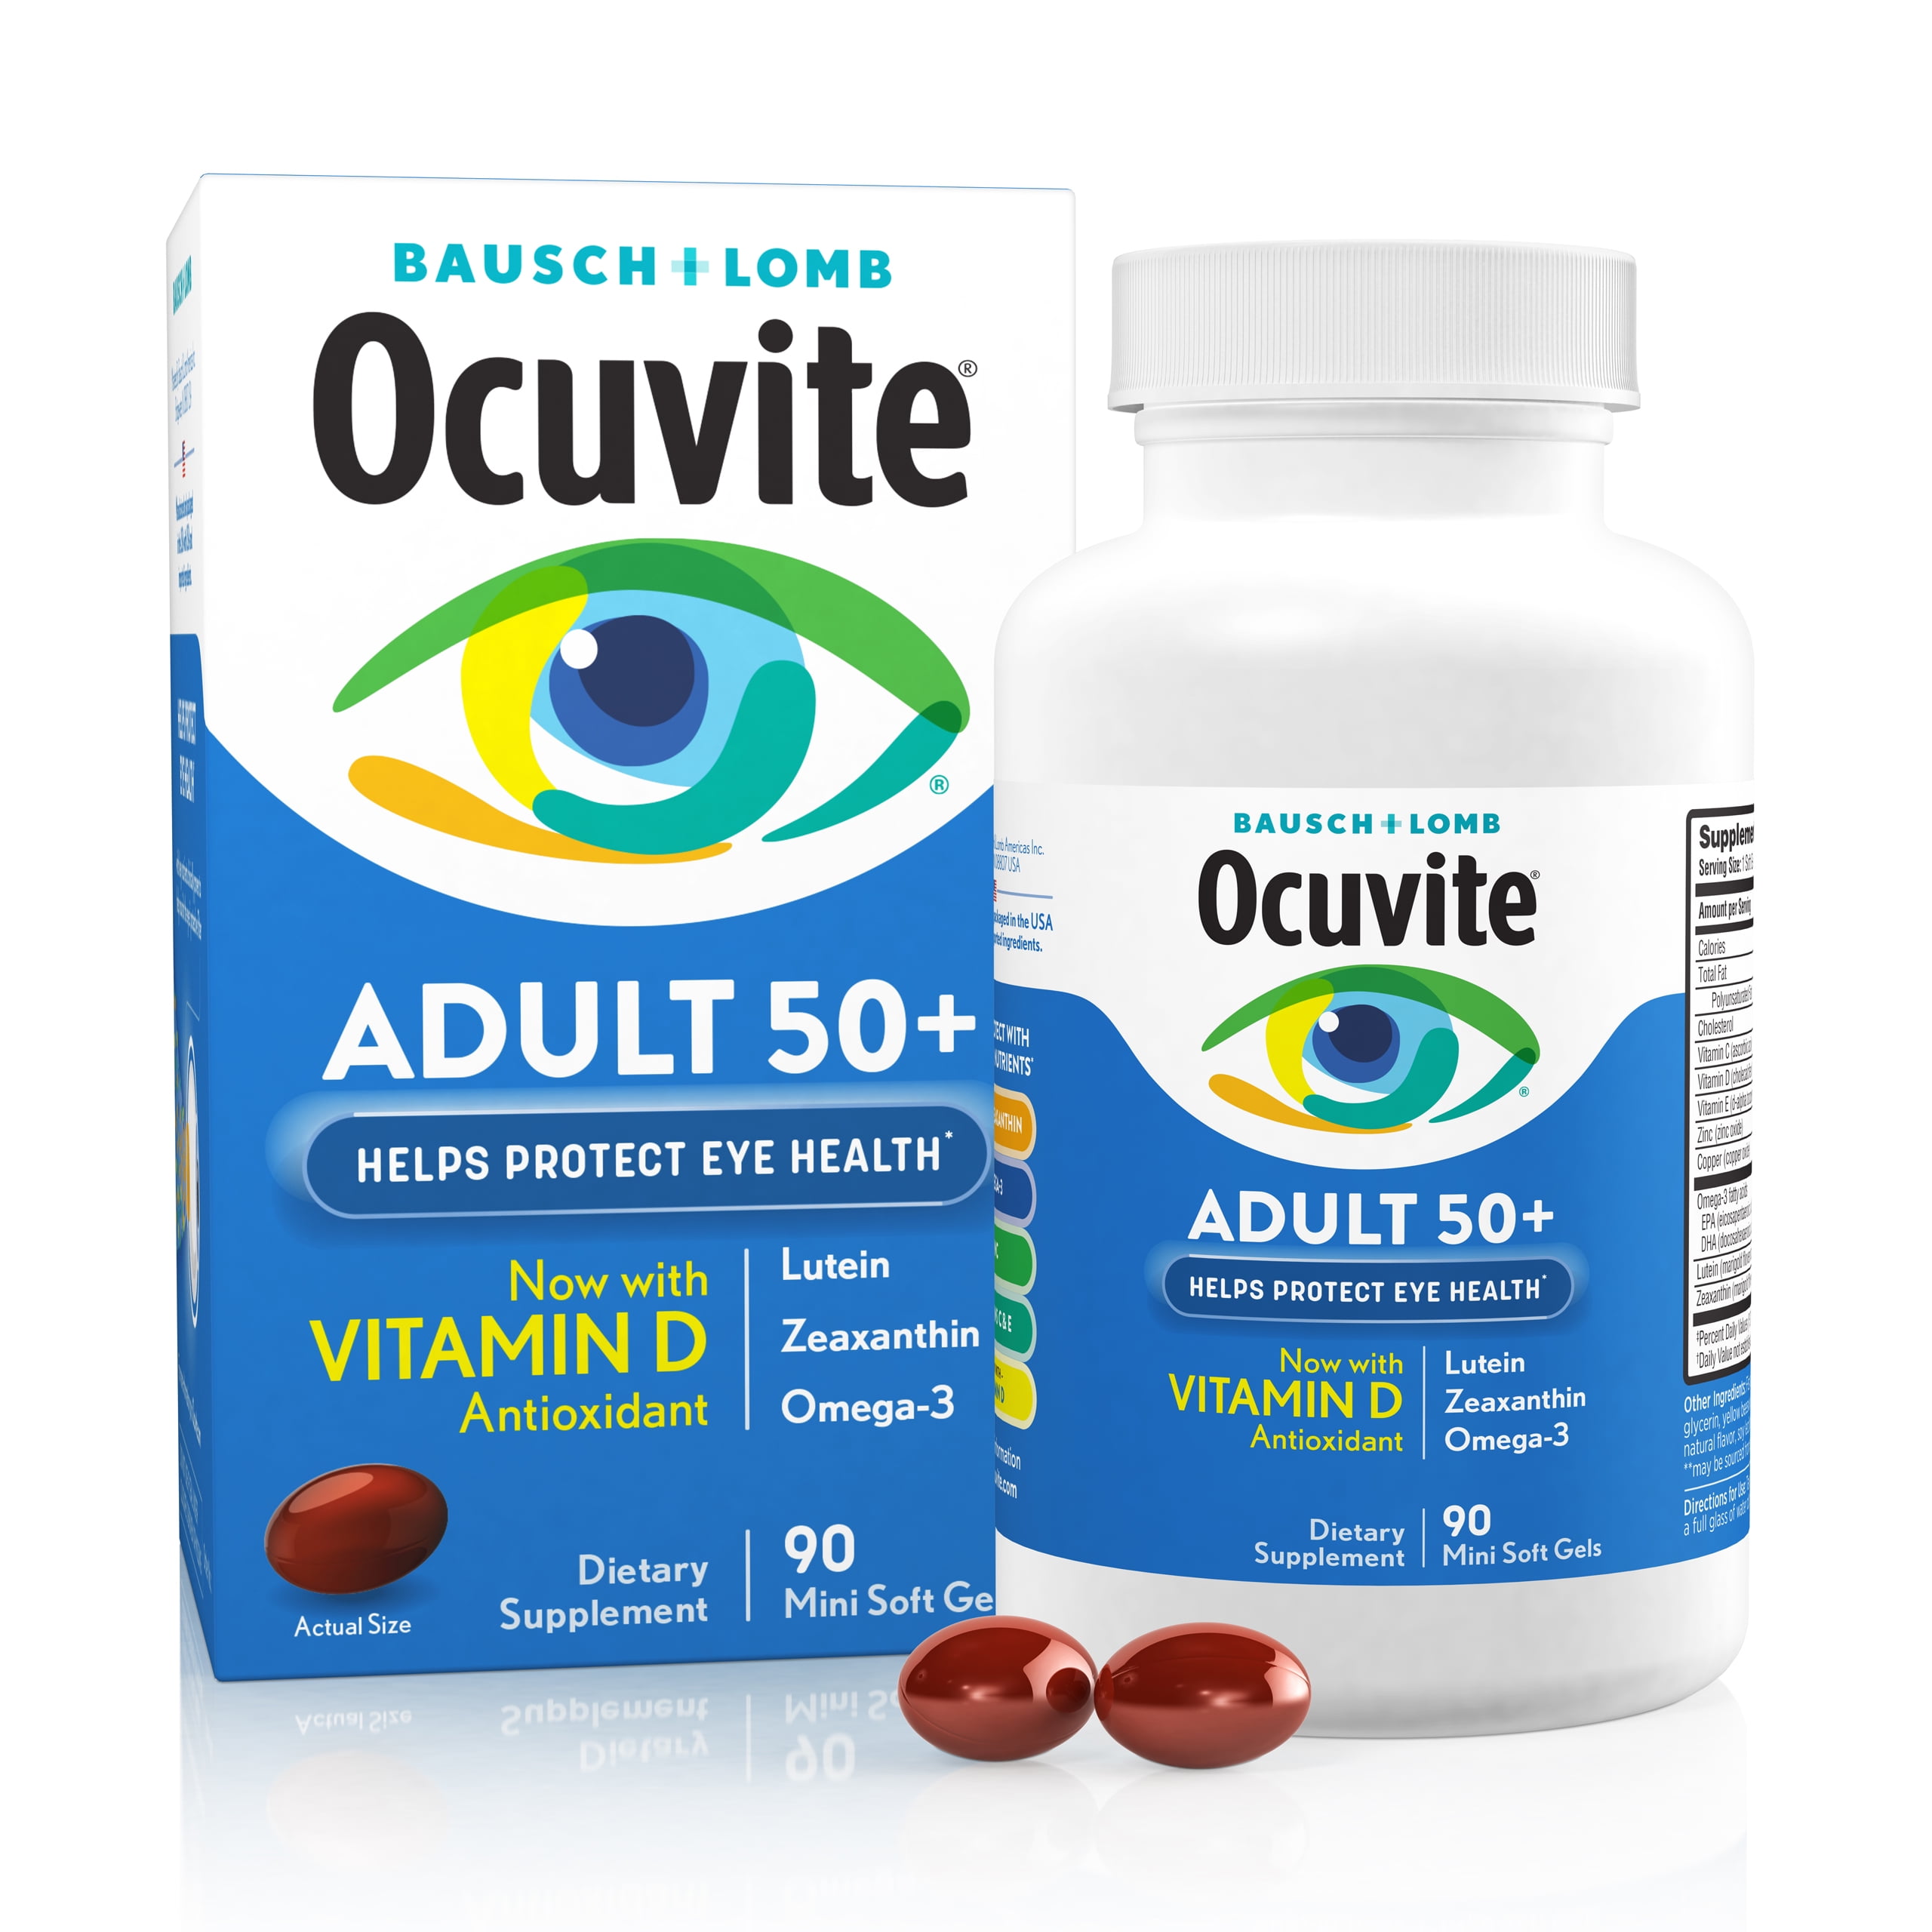 Ocuvite  Adult 50+ Eye Vitamins and Mineral Supplements with Lutein, Zeaxanthin and Omega-3fromBausch + Lomb 90 Soft Gels